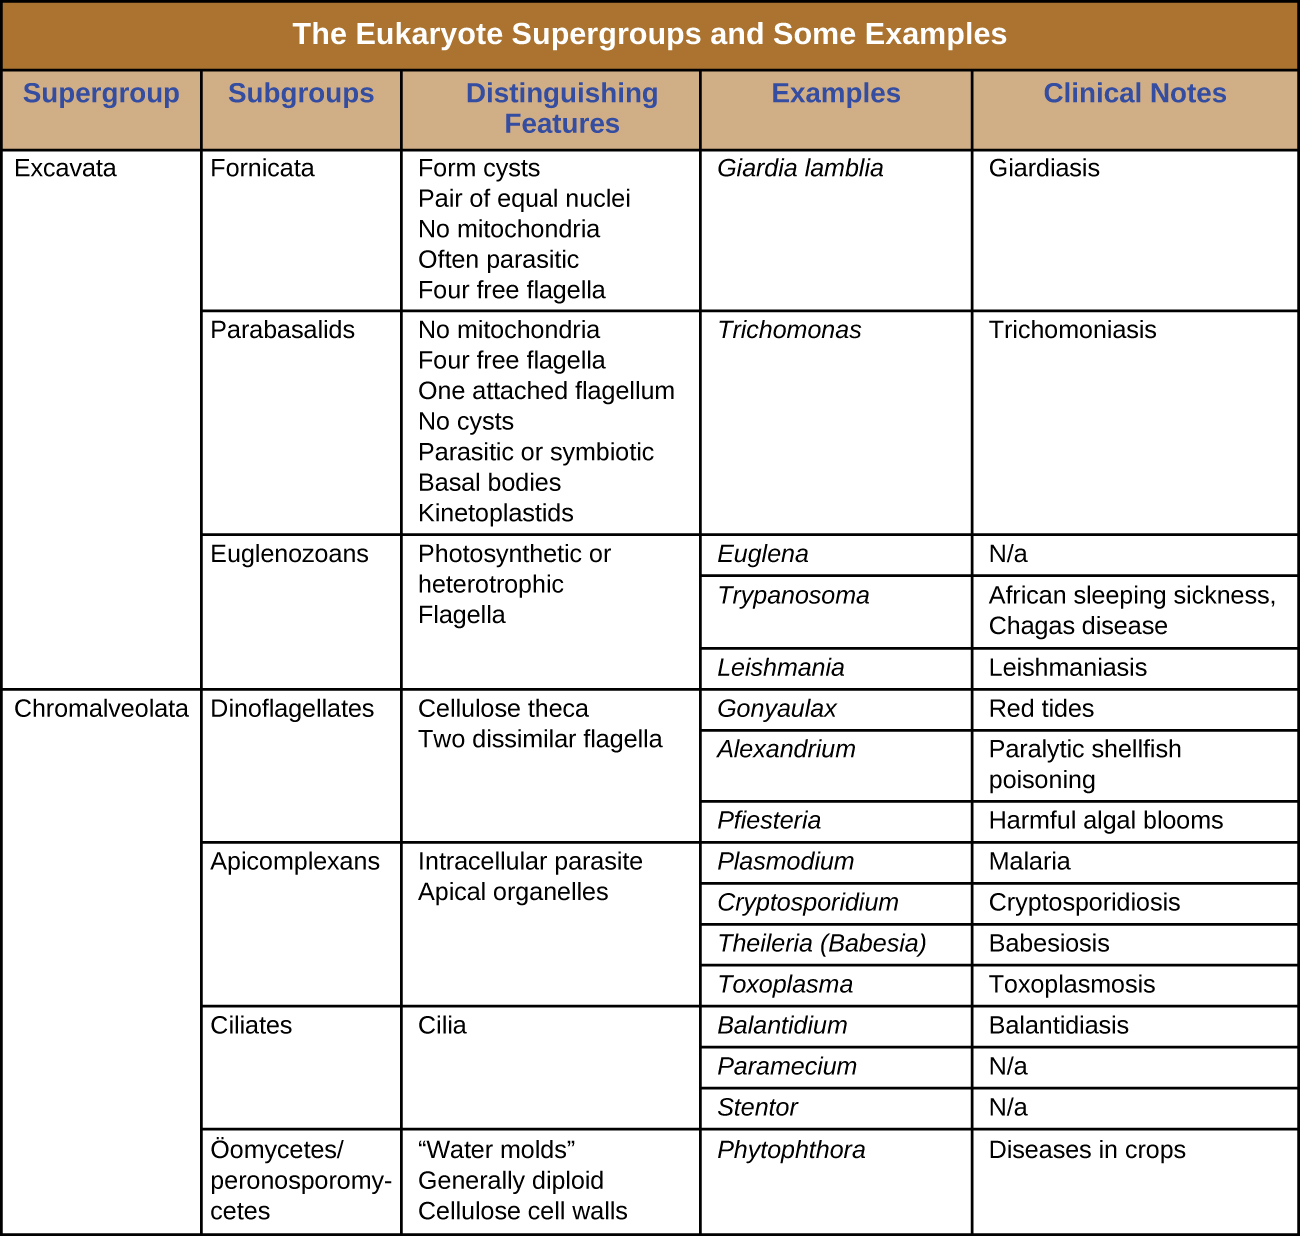 Table titled: the eukaryote supergroups and some example species. There are 5 columns in the table: supergroup, subgroup, distinguishing features, examples and clinical notes. Supergroup Exacavata is divided into 3 subgroups: fornicate, parabasalids, euglenozoans. Fornicata have the following distinguishing features: form cysts, pair of equal nuclei, no mitochondria, often parasitic, four free flagella. An example is giardia lamblia which causes giardiasis. Parabasalids have the following distinguishing features: no mitochondria, four free flagella, one attached flagellum, no cysts, parasitic or symbiotic, basal bodies, kinetoplastids. An example is Trichomonas which causes trichomoniasis. Euglenozoans have the following distinguishing features: photosynthetic or heterotrophic, flagella. Examples include: Euglena which does not cause disease, Trypanosoma which causes African sleeping sickness and Chagas disease, Leishmanial which causes leishmaniasis. The supergroup Chromalveolata is divided into 4 subgroups: dinoflagellates, apicomplexans, ciliates, and oomyctes/peronosporomycetes. Dinoflagellates have the following distinguishing features: cellulose theca and two dissimilar flagella. Examples include Gonyaulax which causes red tides, Alexandrium which causes paralytic shellfish poisoning, and Pfiesteria which causes harmful algal blooms. Apicomplexans have the following distinguishing features: intracellular parasite and apical organelles. Examples include Plasmodium which causes malaria, Cryptosporidium which causes cryptosporidiosis, Theileria (Babesia) which causes babeiosis, and Toxoplasma which causes Tosoplasmosis. Ciliates have the characteristic of cilia. Examples include Balantidium which causes Balantidiasis. Paramecium and Stentor which do not cause diseas. Oomycetes / peronosporomycetes have the following distinguishing features: water molds, generally diploid, cellulose cell wall. An example is Phytophthora which causes diseases in crops.